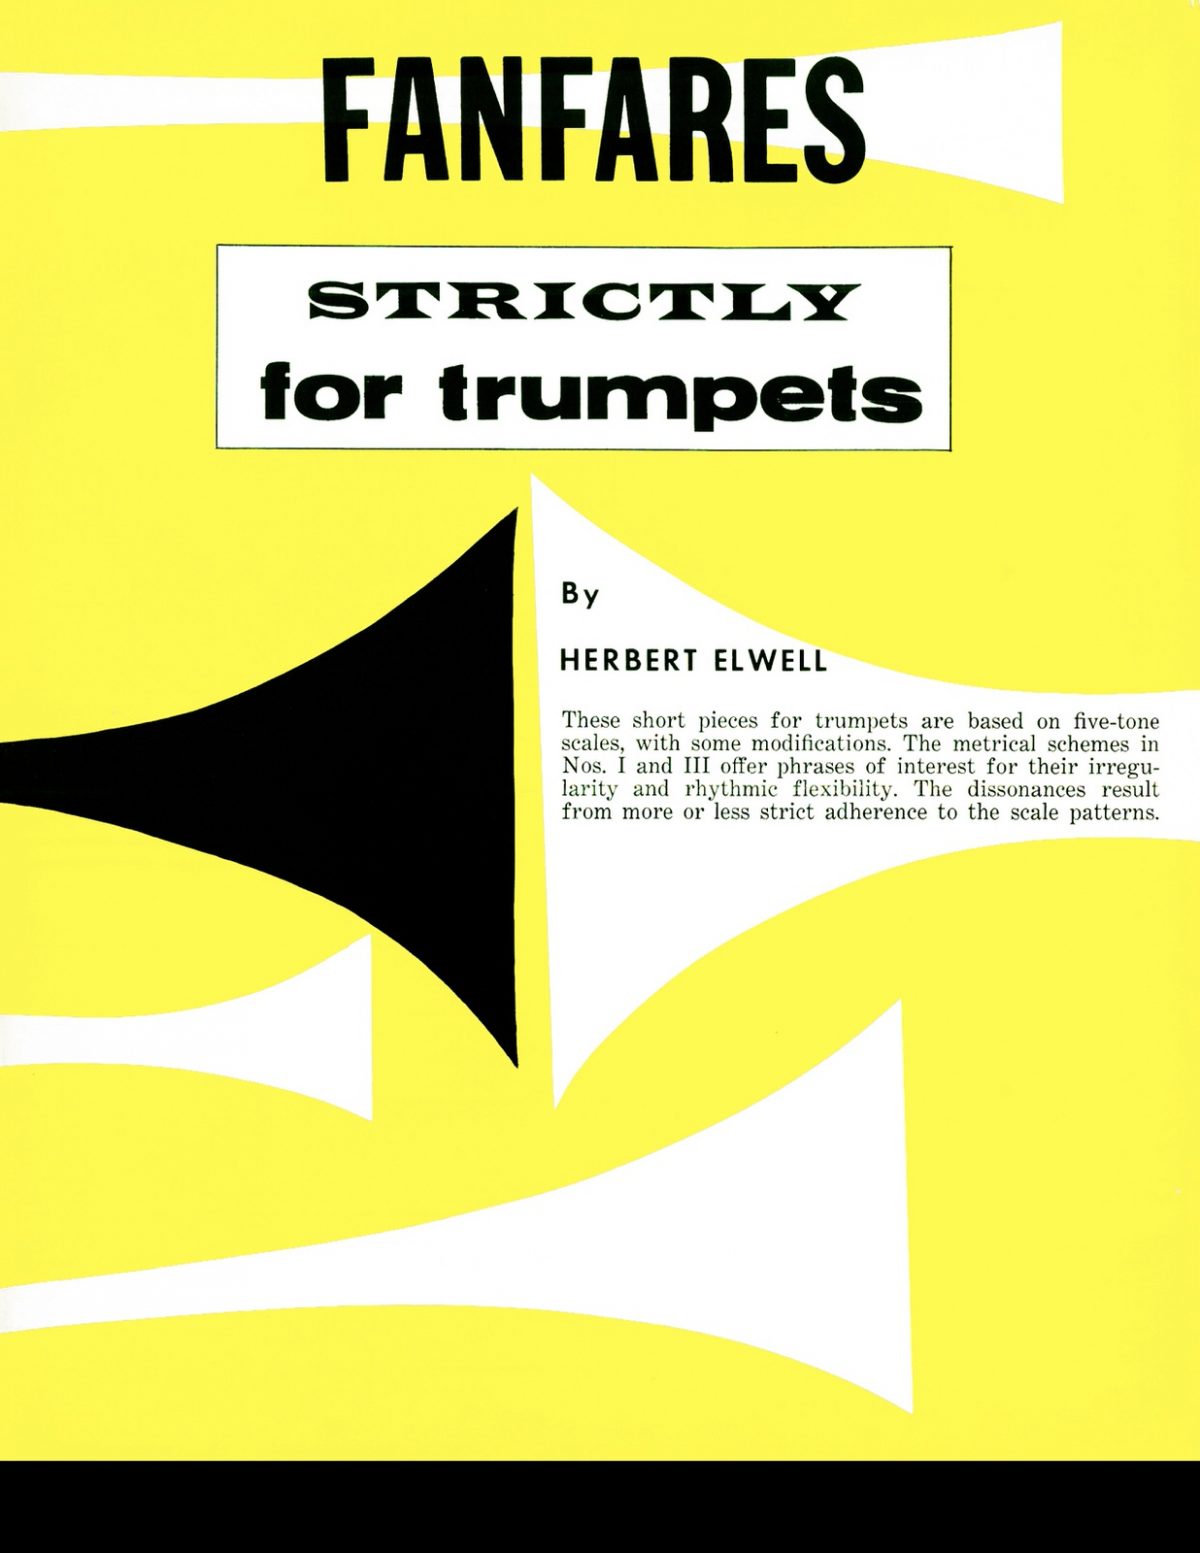 Elwell, Herbert, Fanfares Strictly for Trumpets-p01